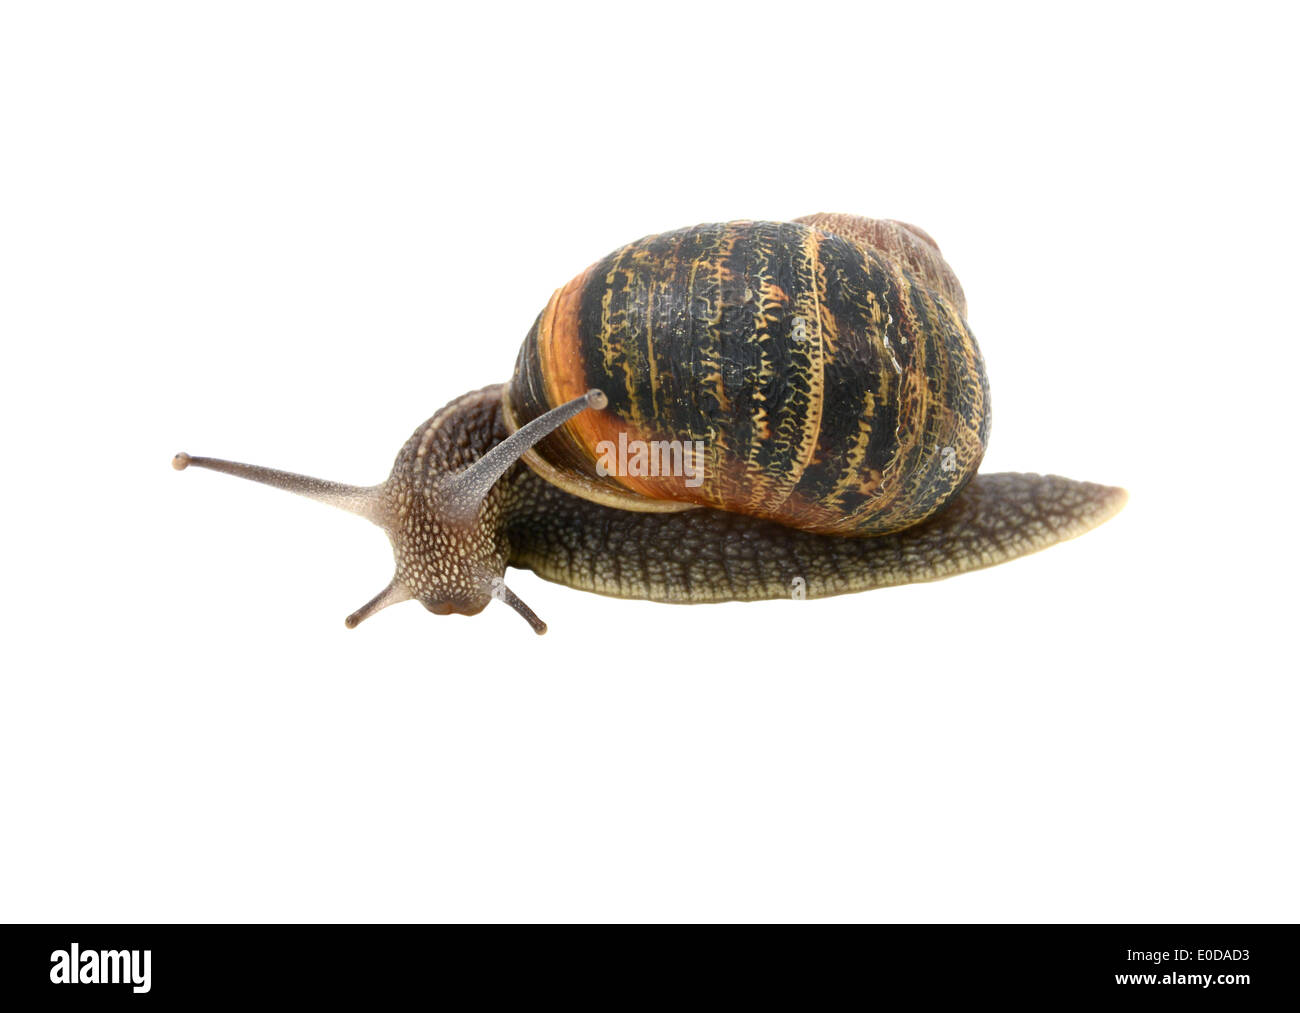 Garden snail with striped shell turning forwards, isolated on a white background Stock Photo